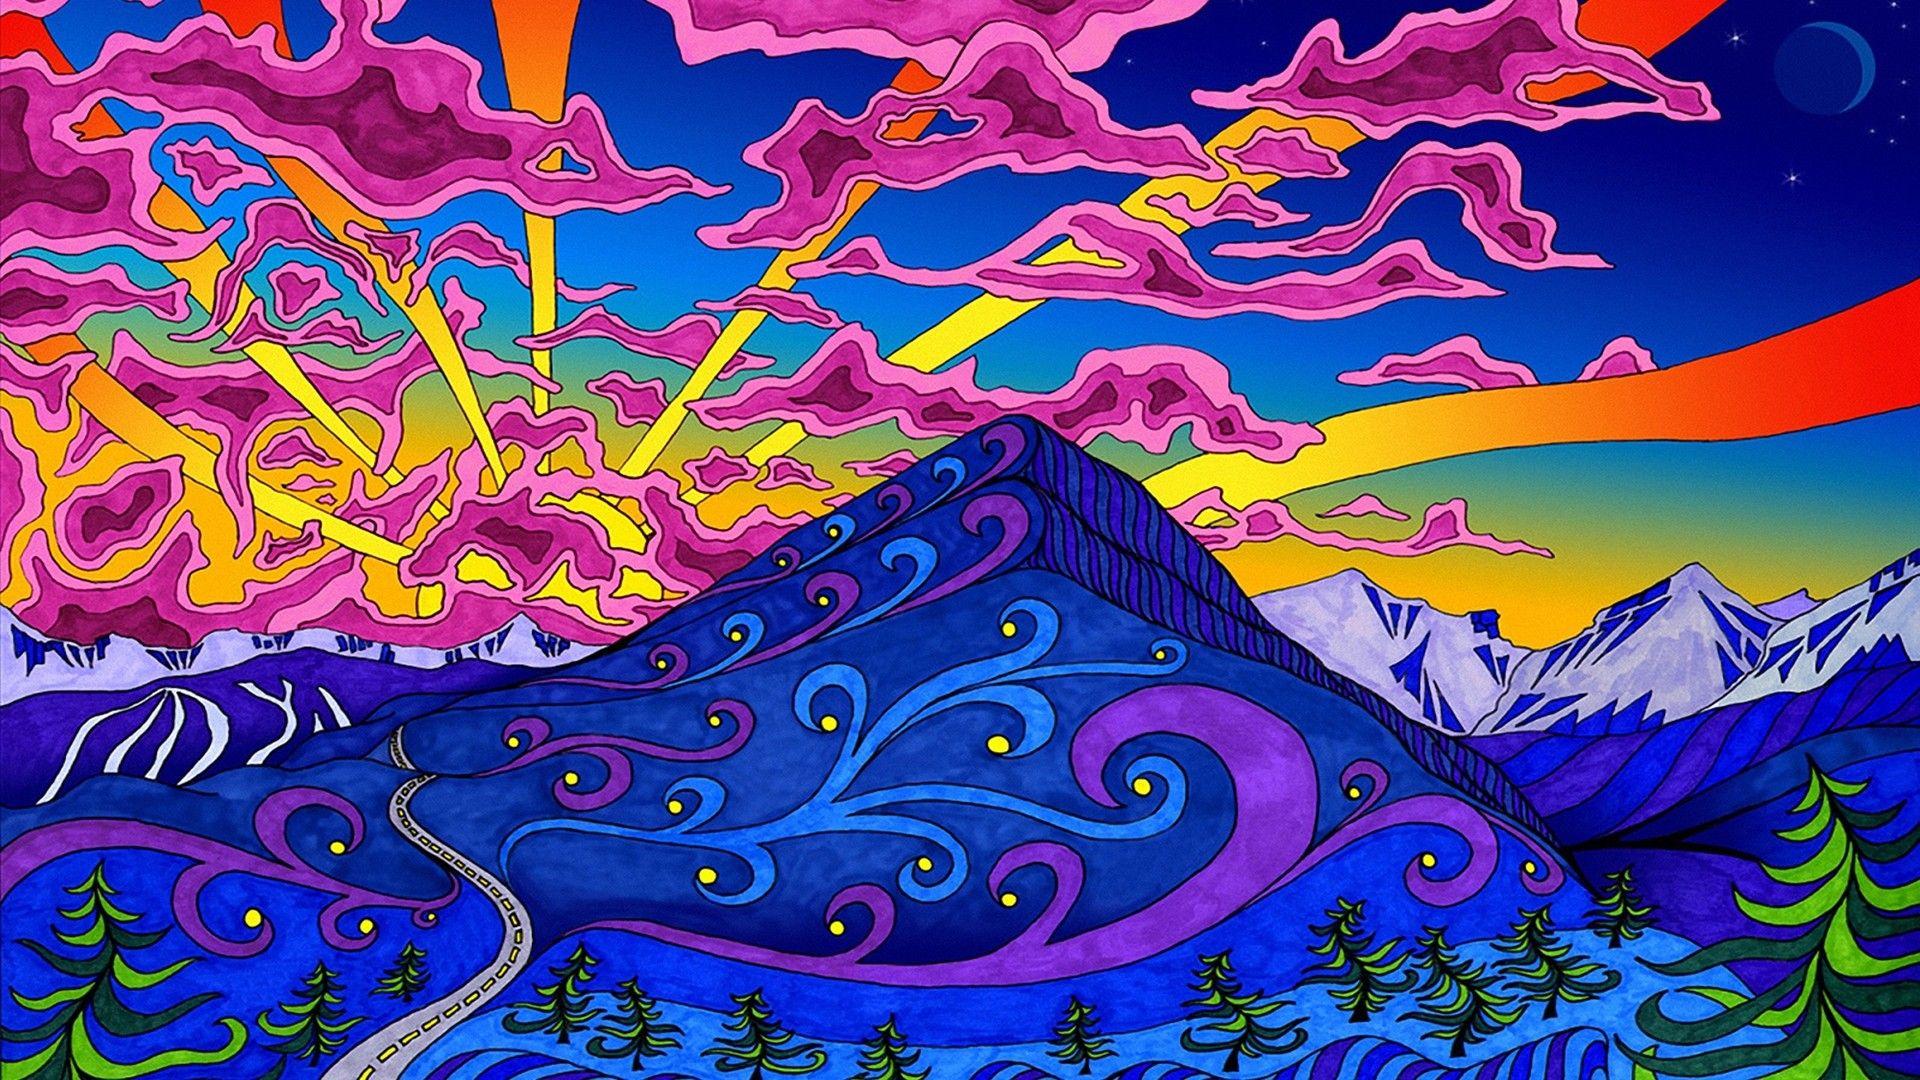 1920x1080 Trippy Art Background Gallery (69 Plus) PIC WPT406690